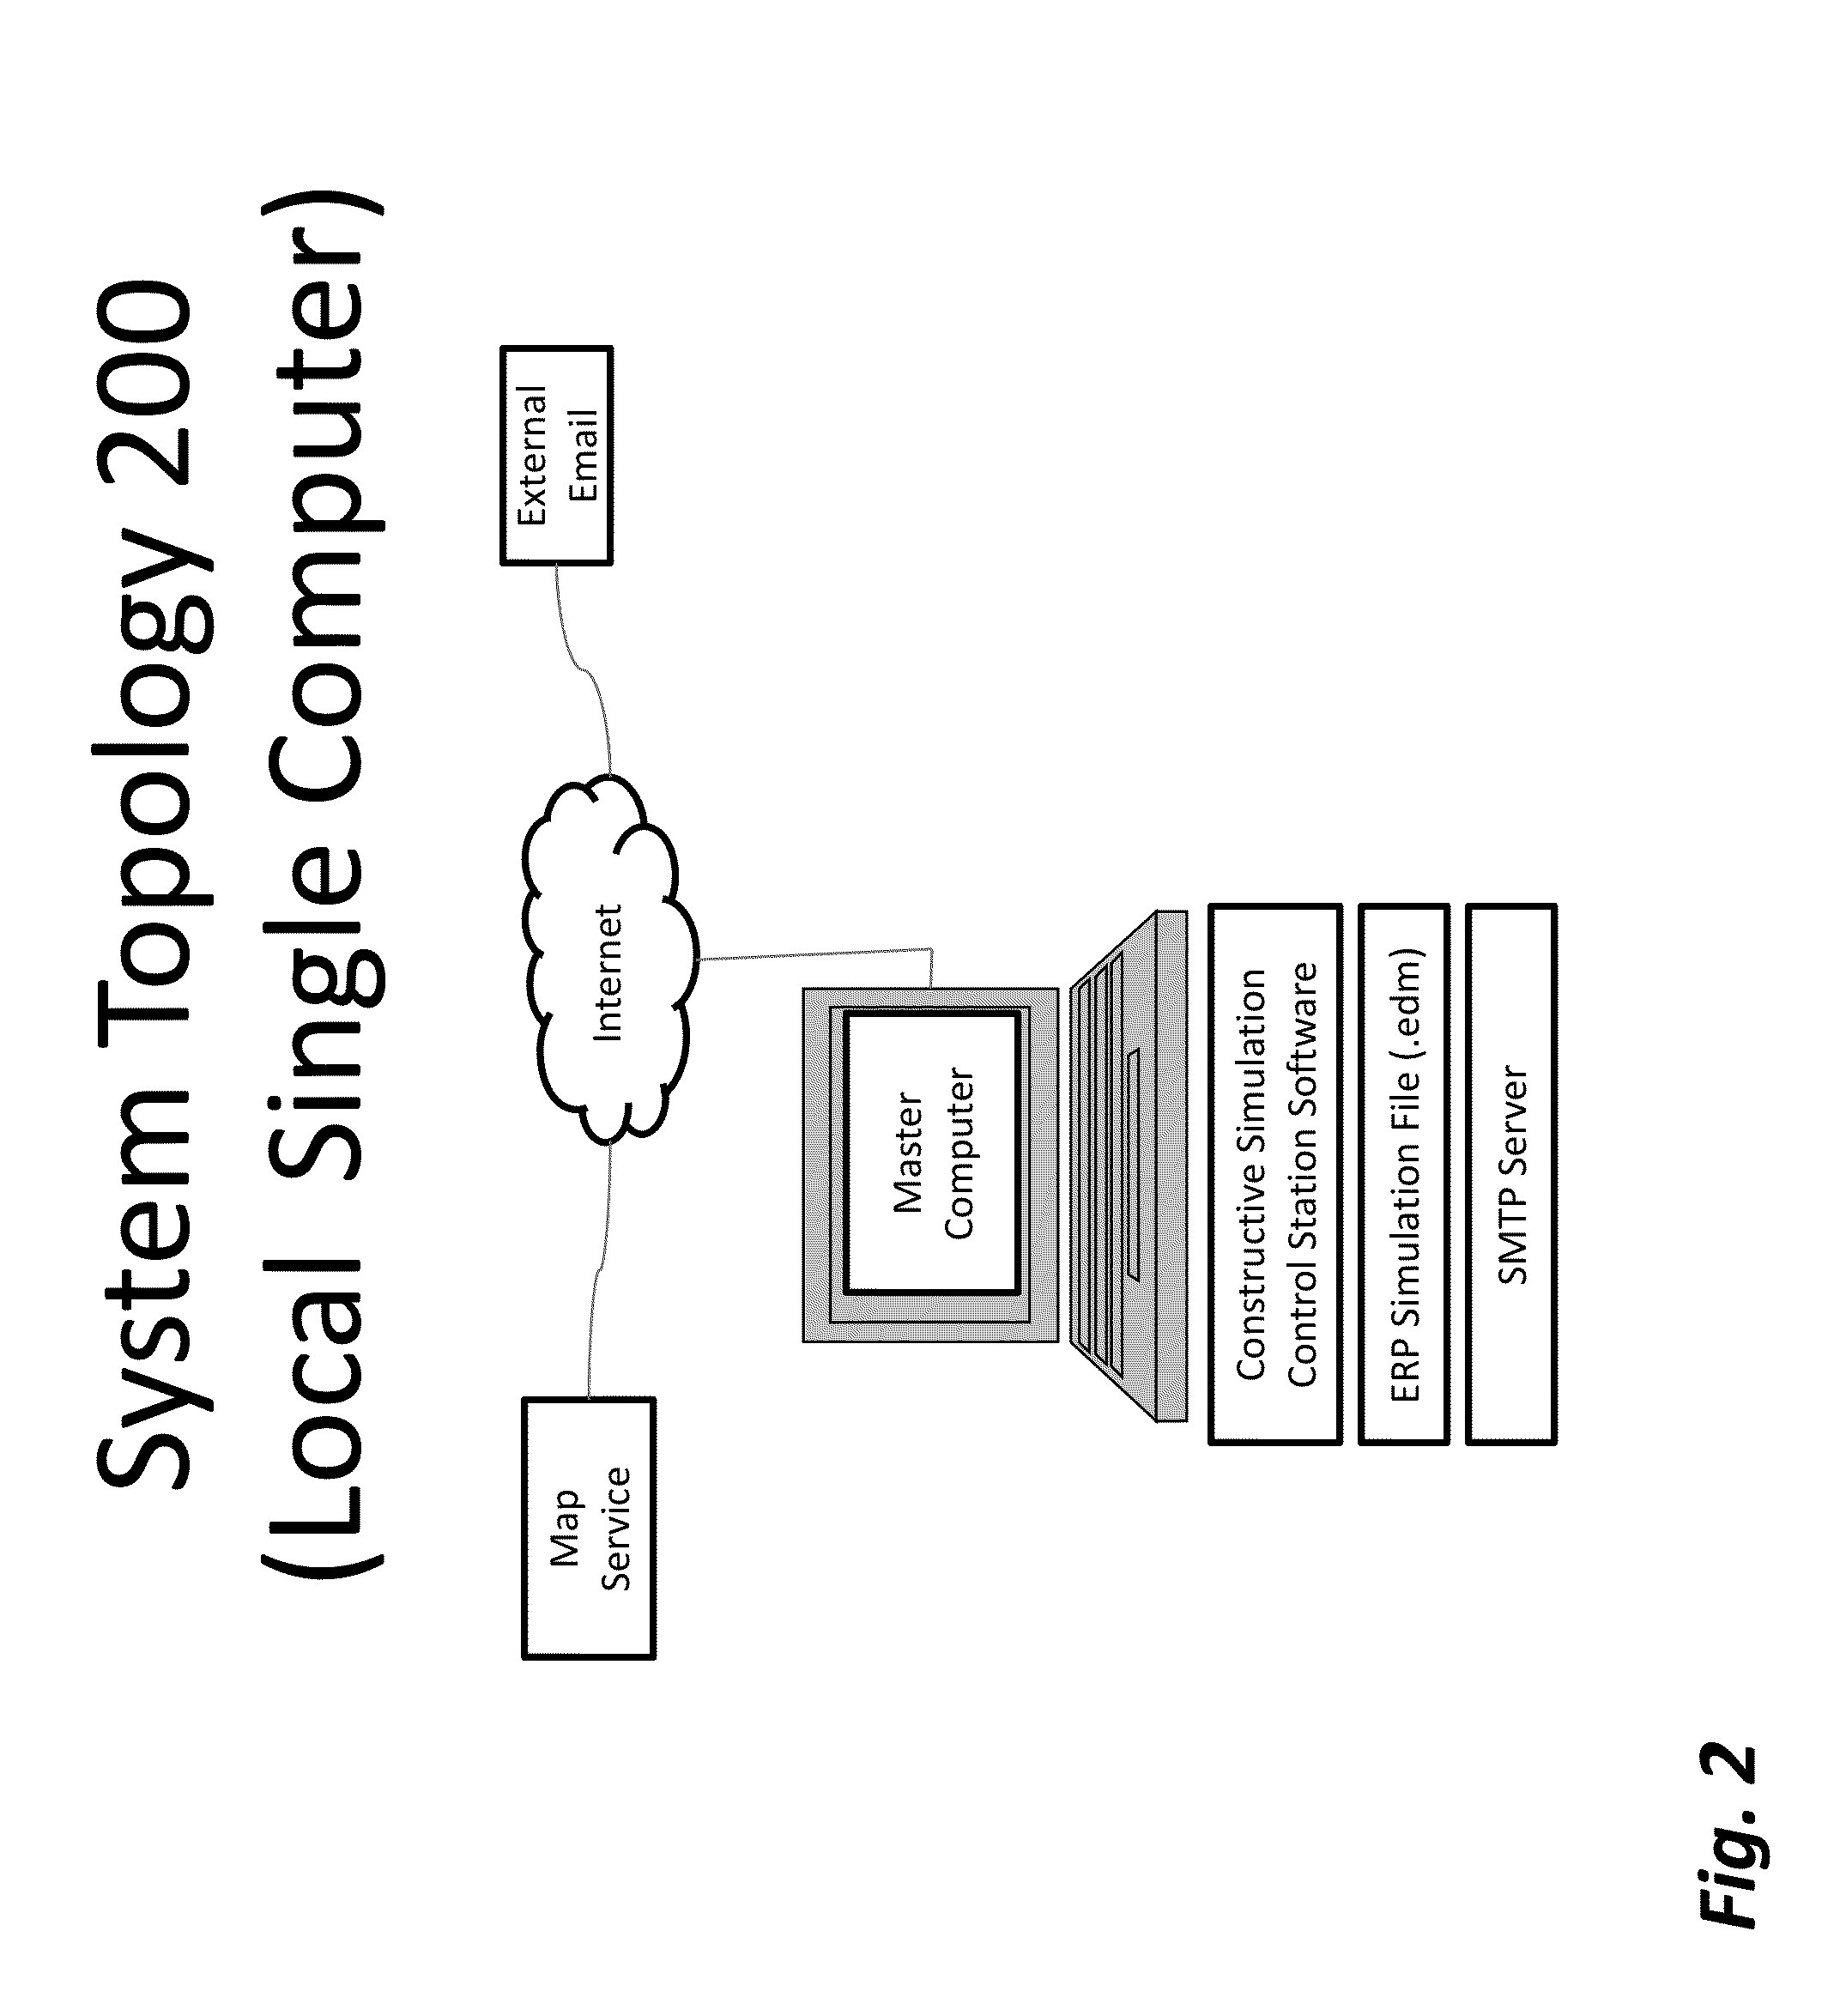 System and method for dynamic simulation of emergency response plans